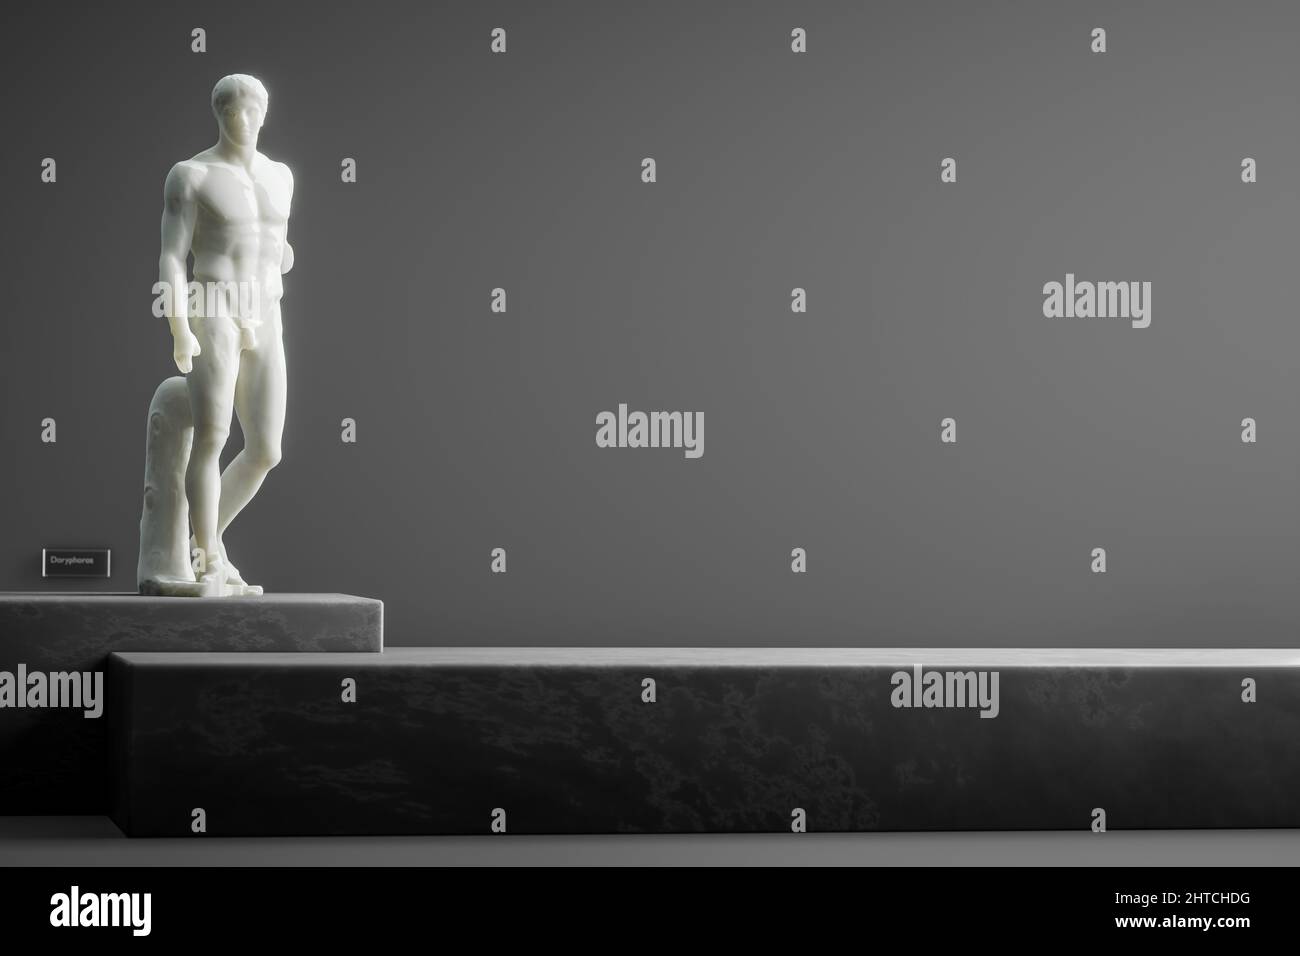 3D rendering of the statue of Doryphoros in a virtual museum in a grey background Stock Photo